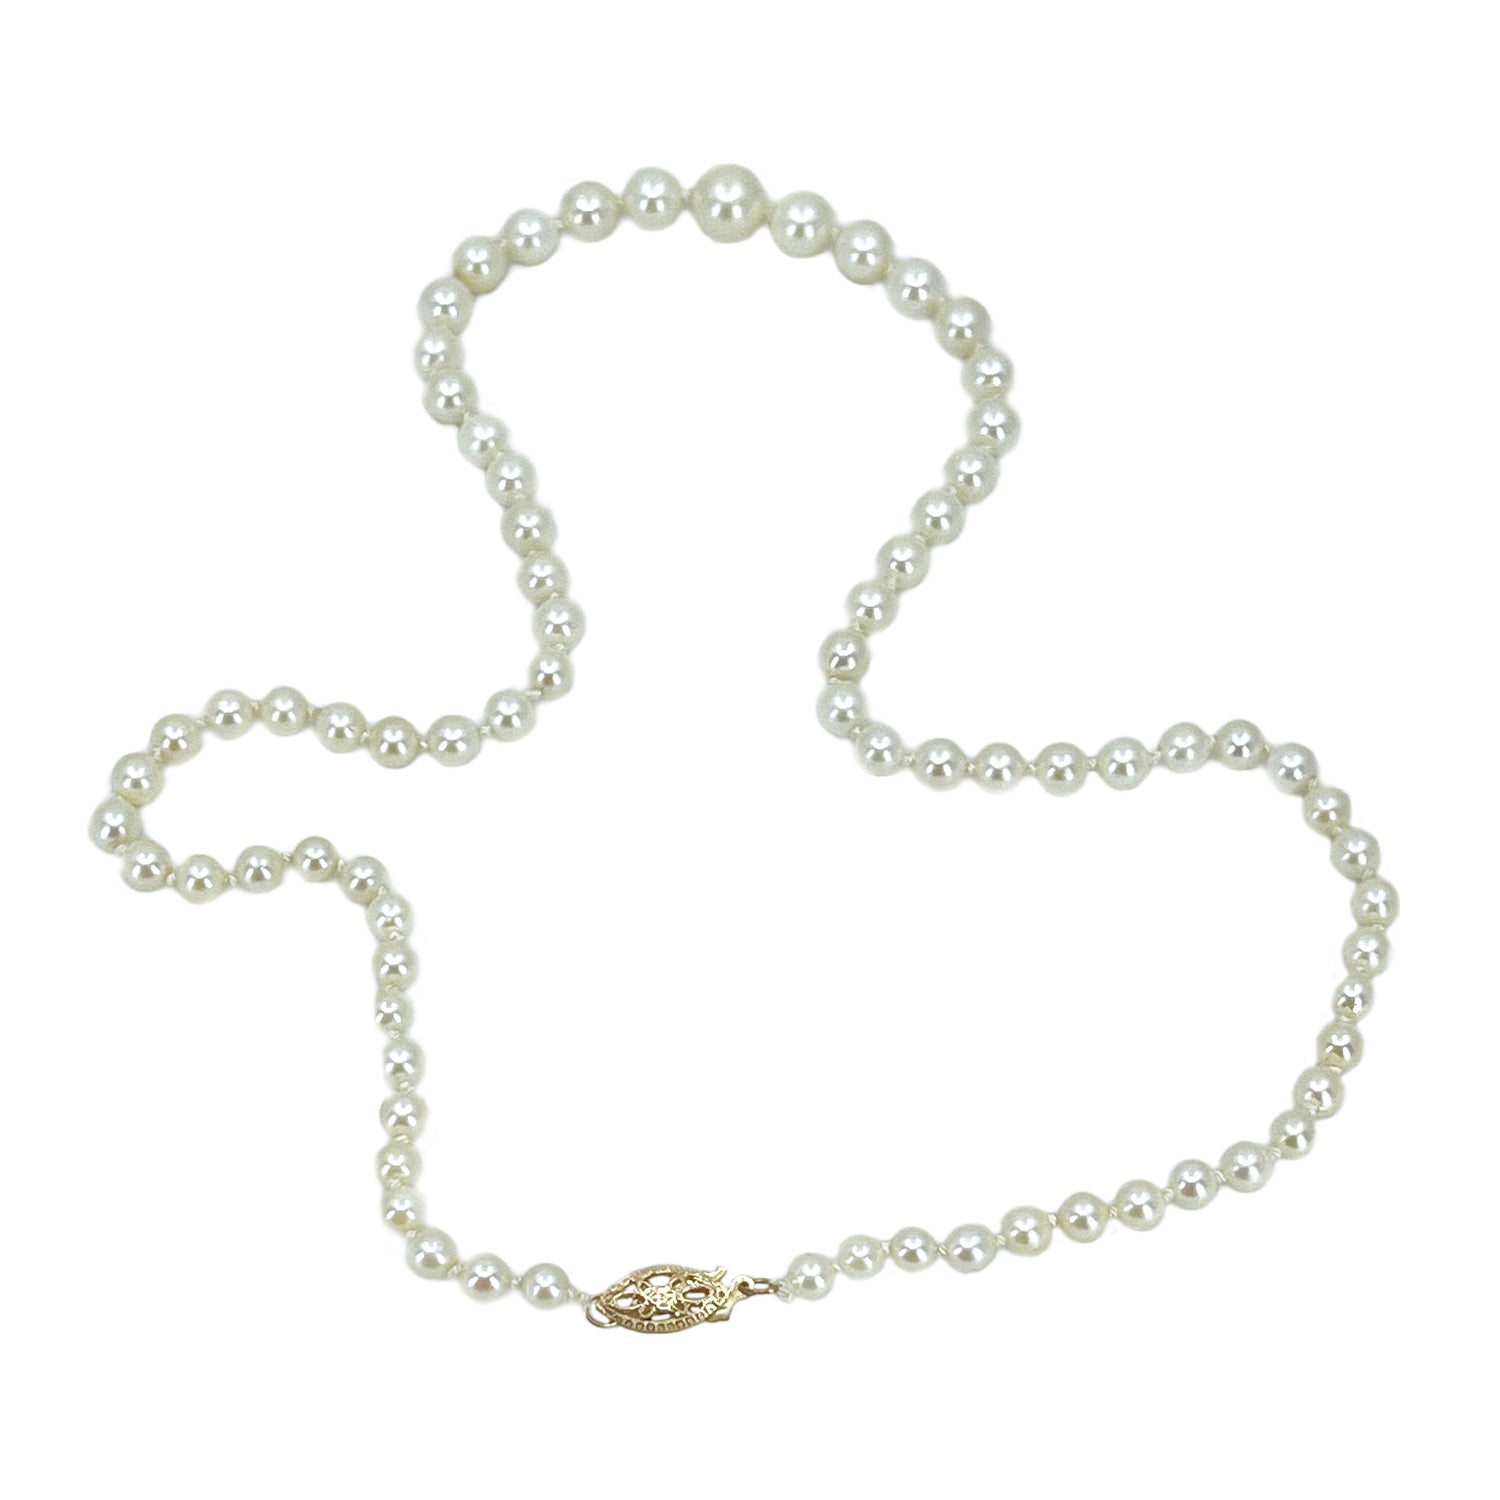 Graduated Vintage Japanese Cultured Saltwater Akoya Pearl Necklace - 14K Yellow Gold 16.75 Inch